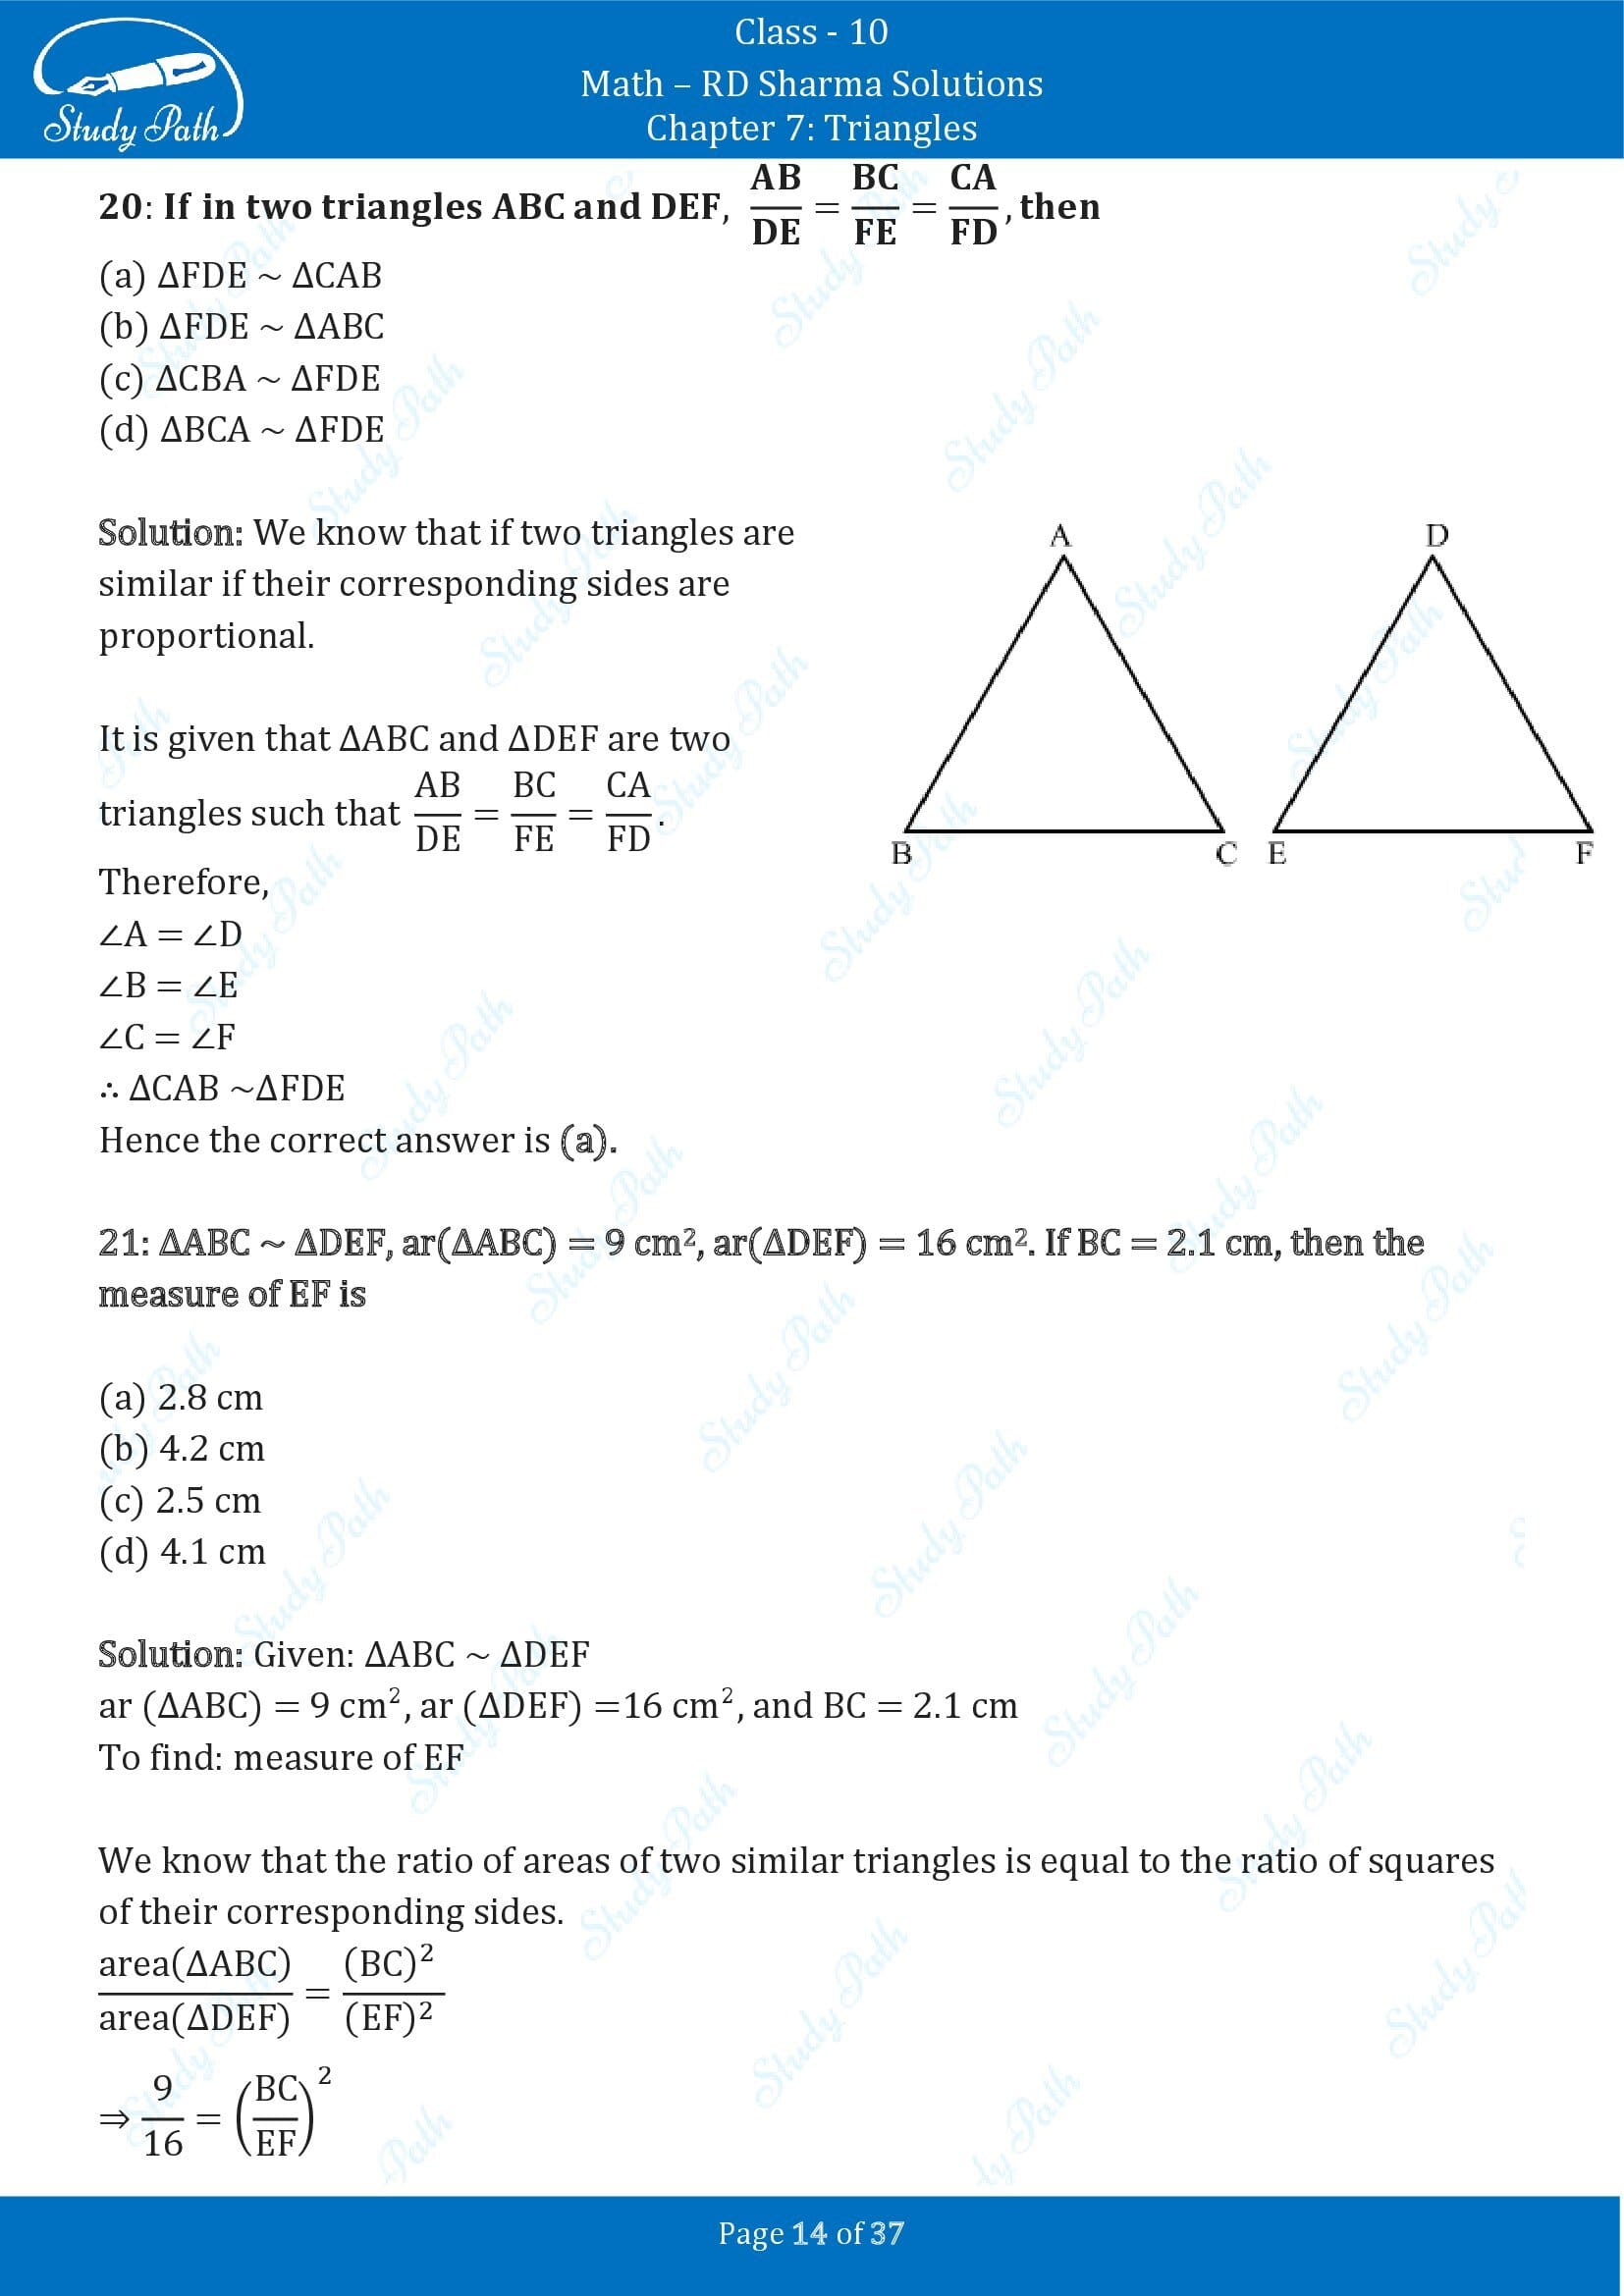 RD Sharma Solutions Class 10 Chapter 7 Triangles Multiple Choice Question MCQs 00014